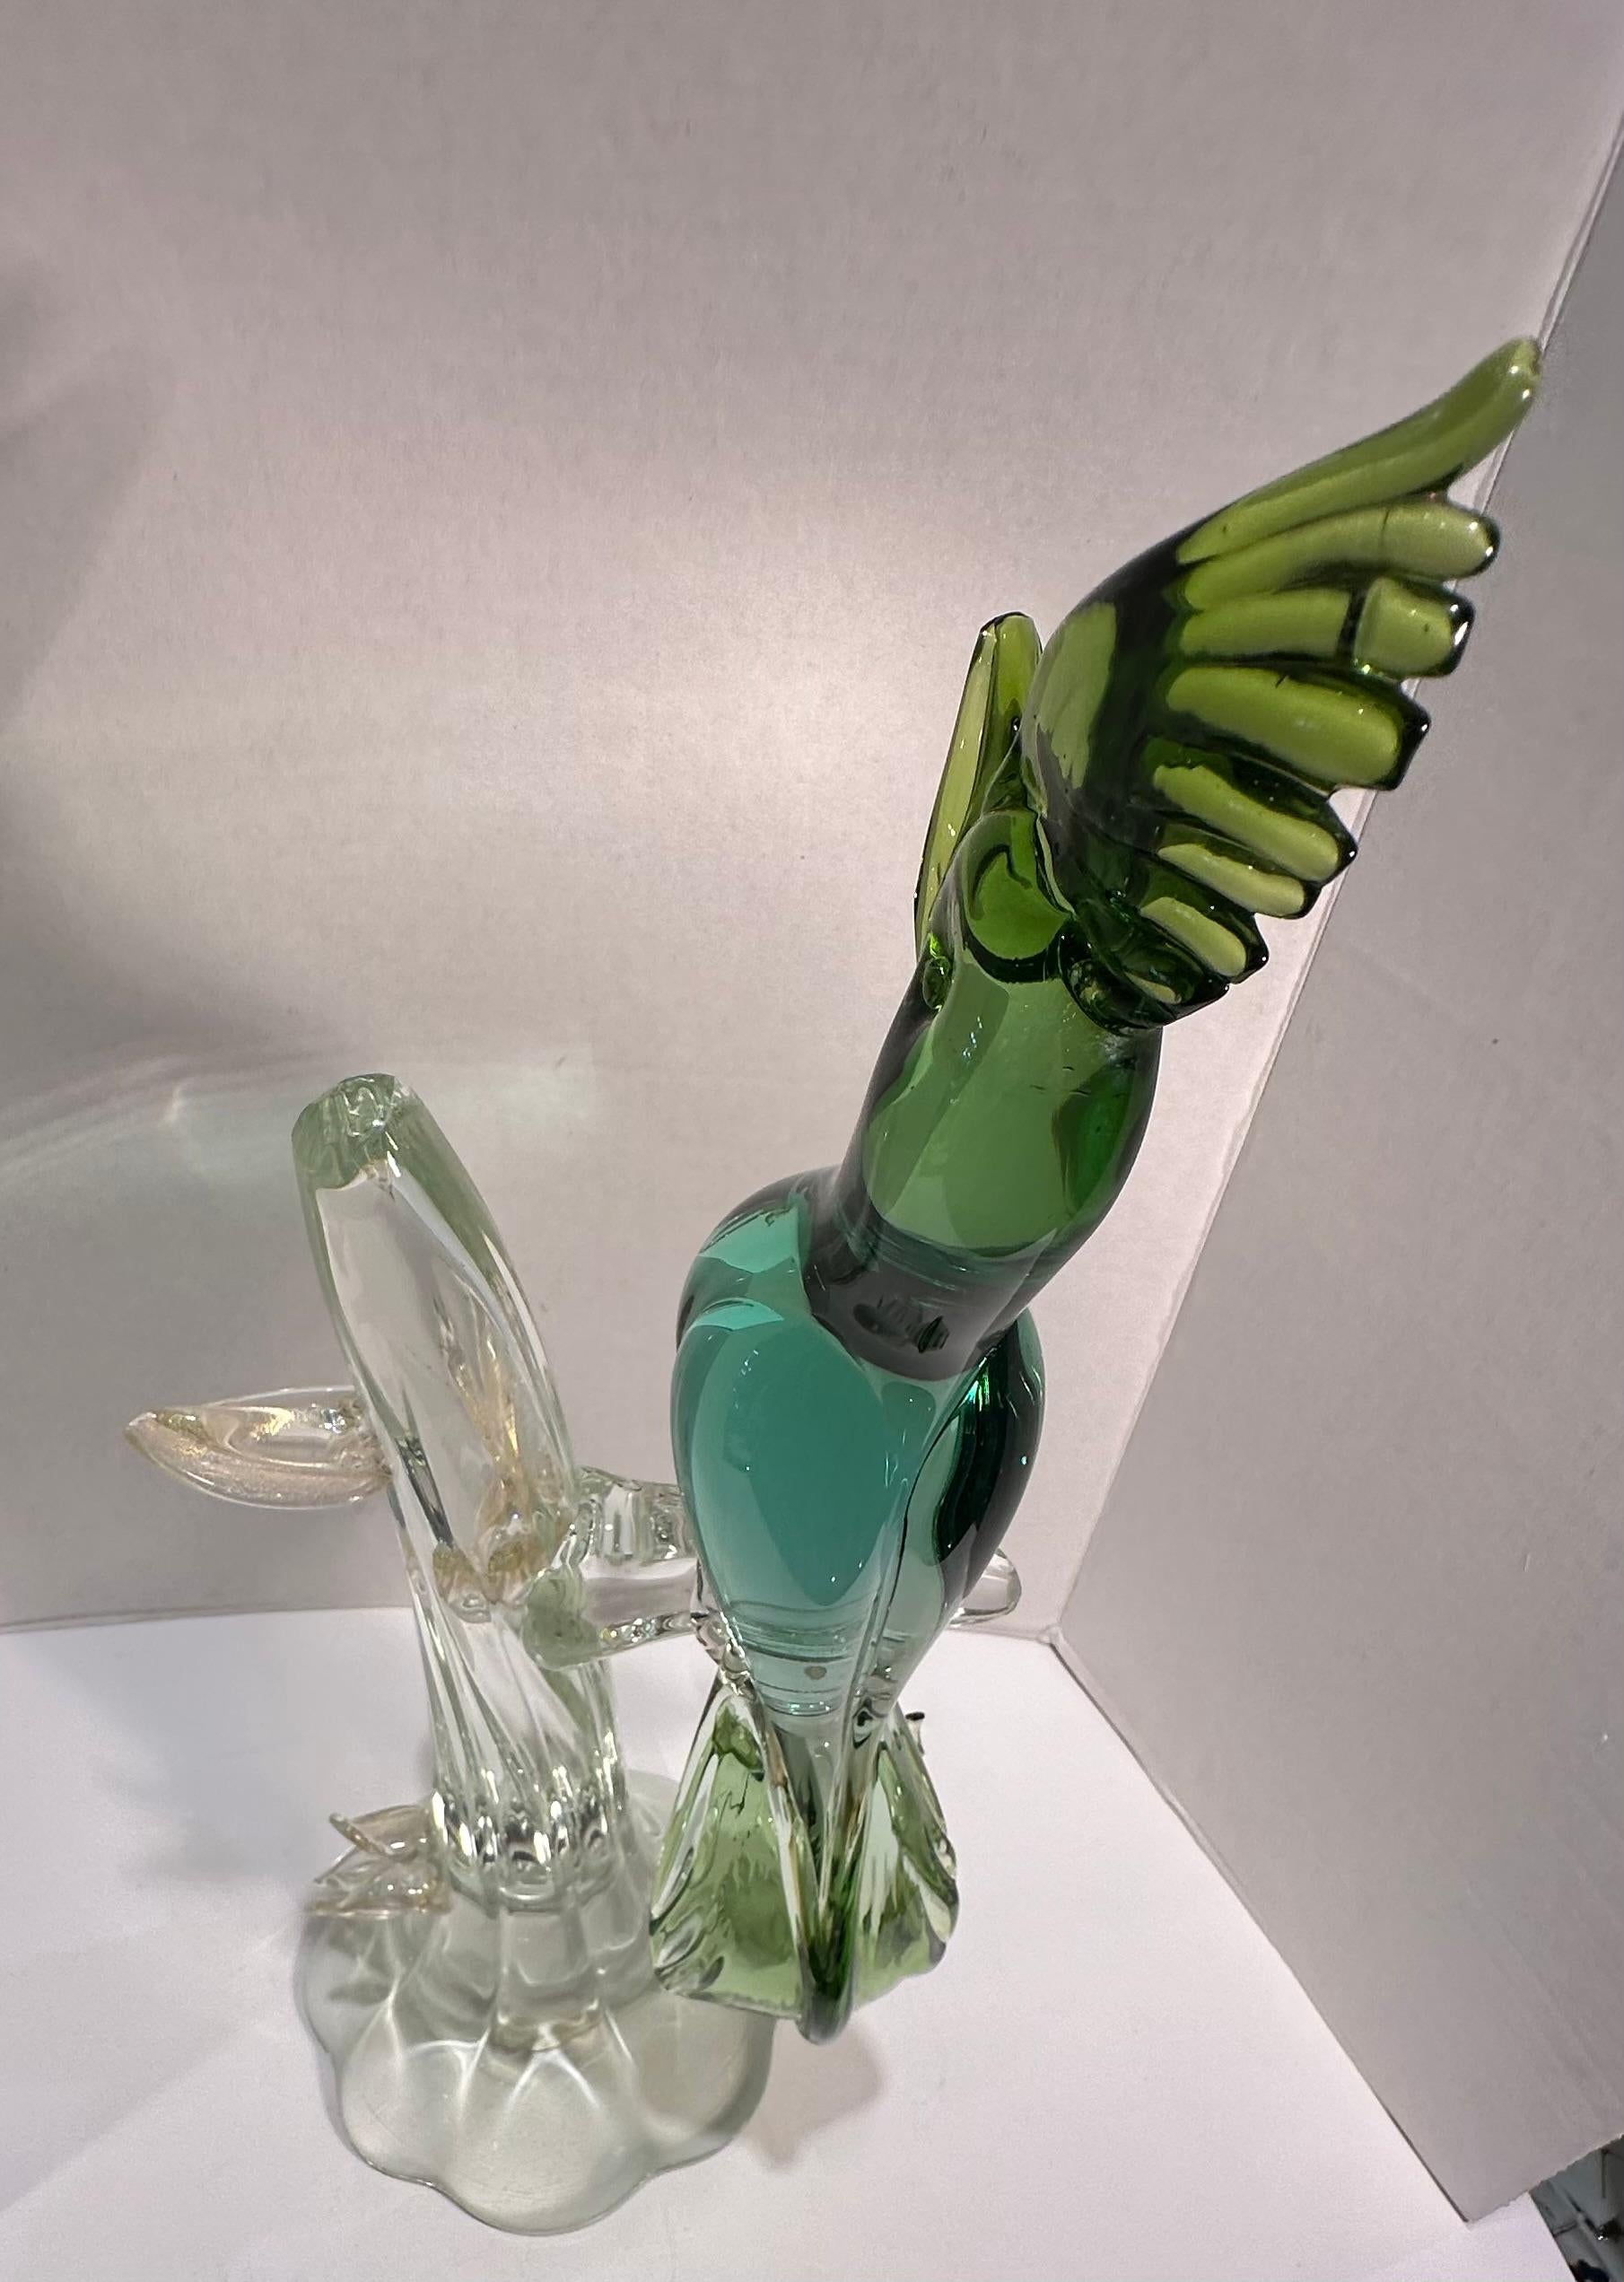  Large Salviati Italy Murano Glass Exotic Bird Figurine in Shades of Green  For Sale 1